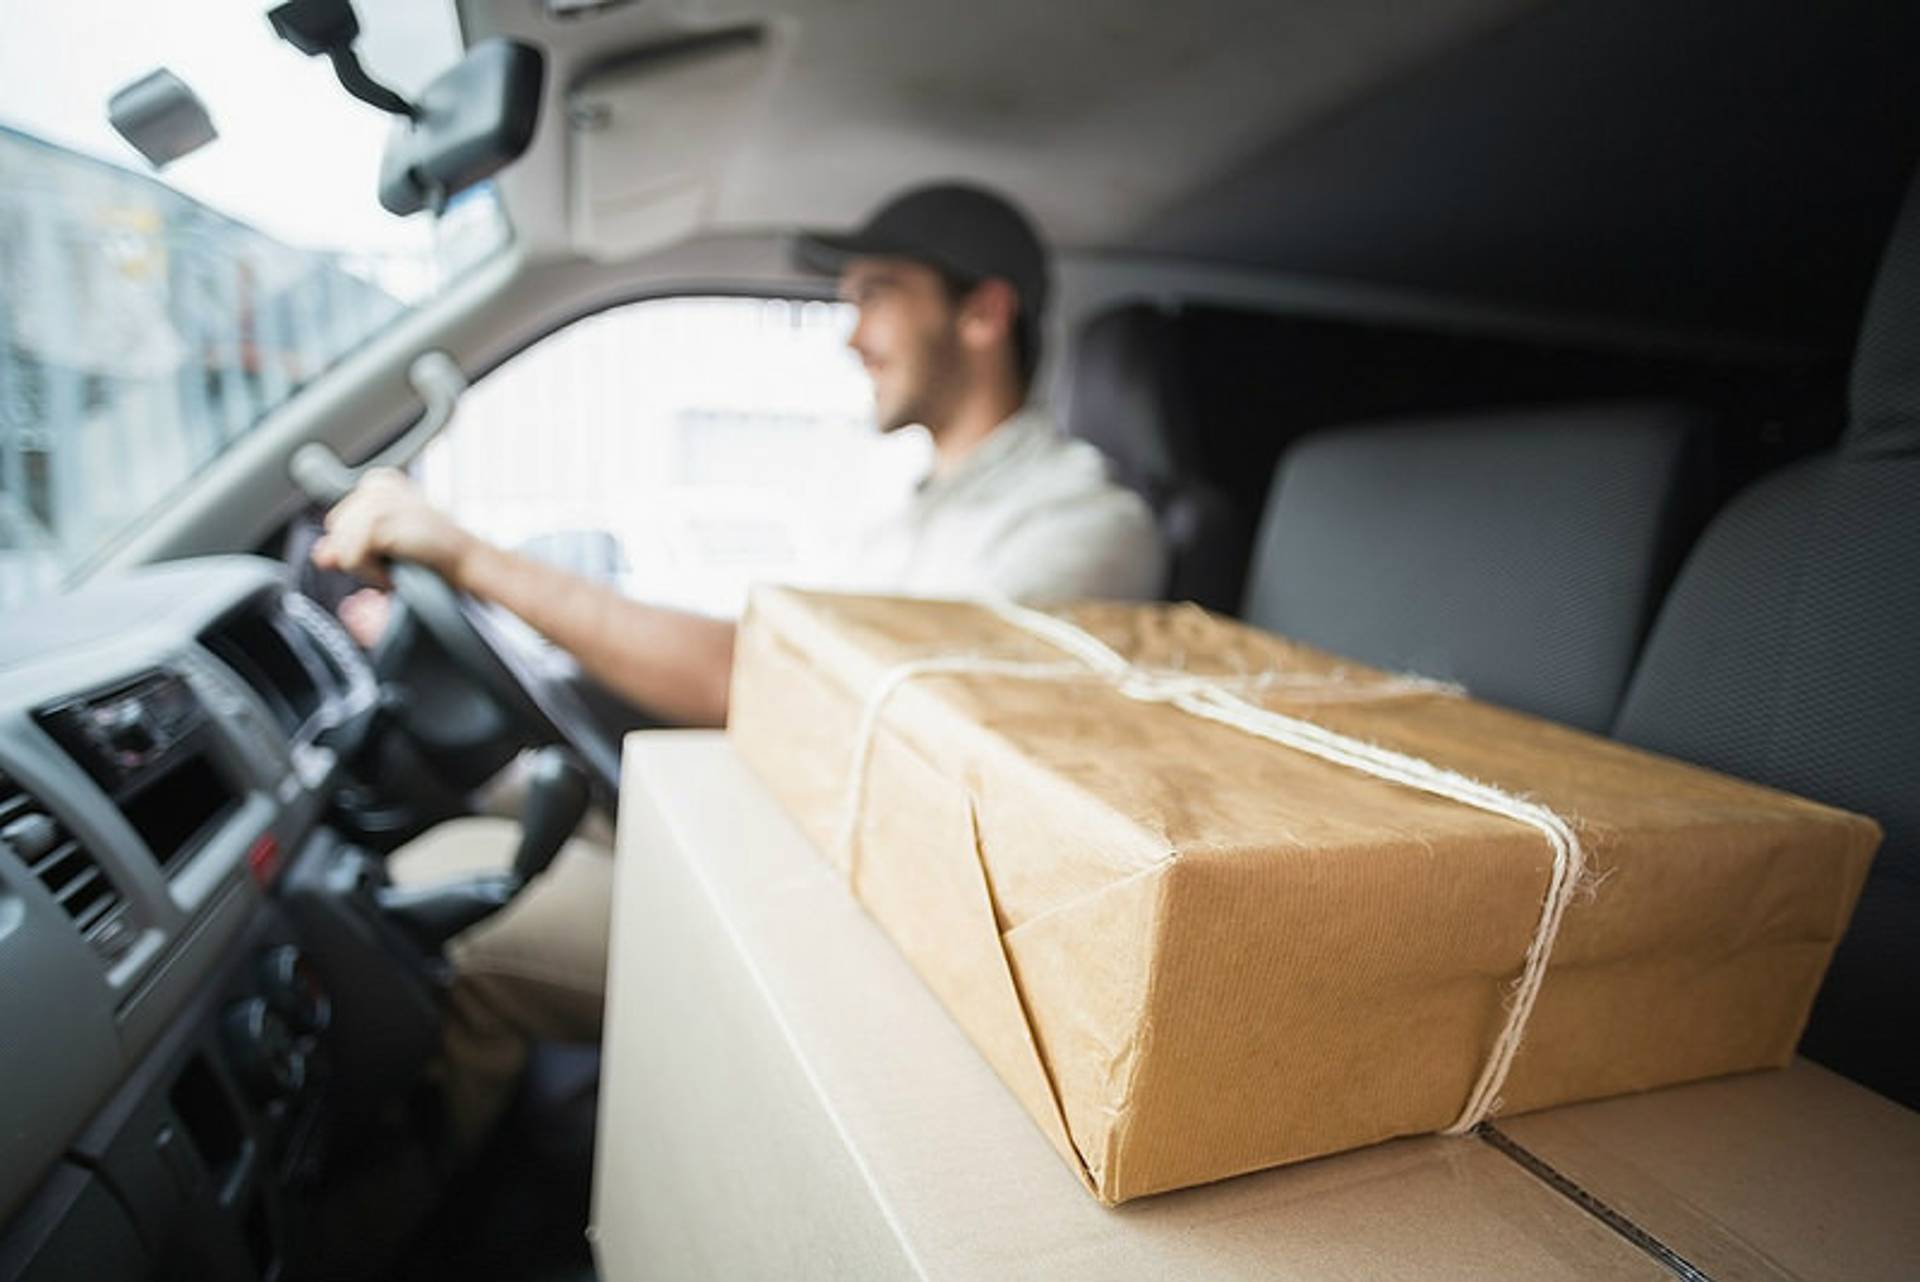 Shyp offers a seamless delivery service